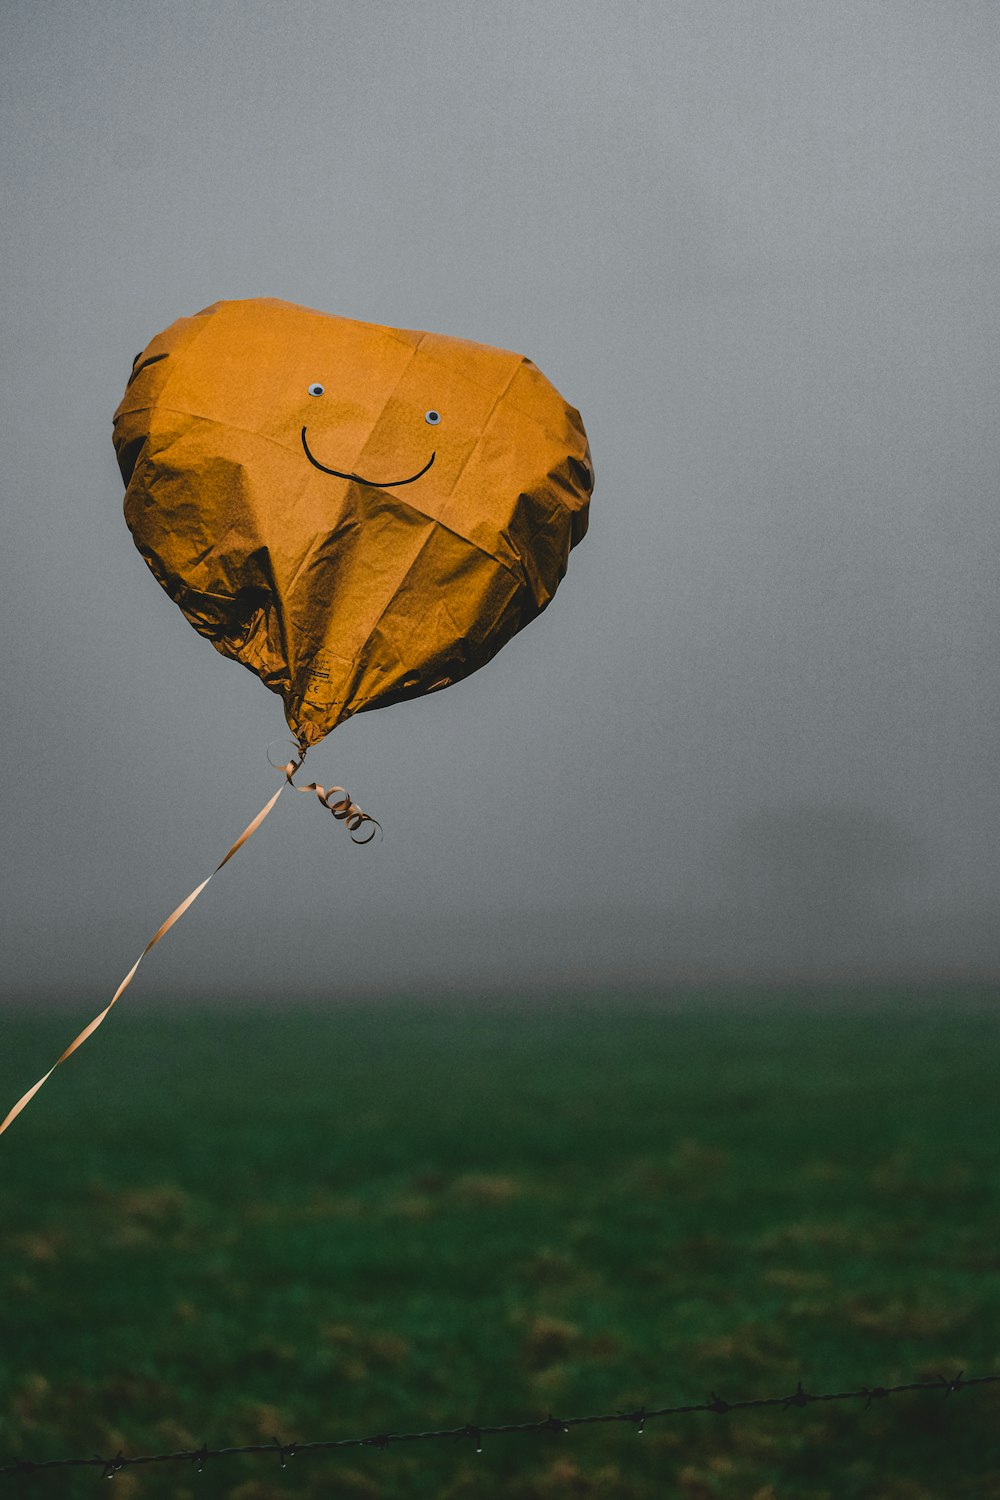 a yellow kite with a smiley face on it